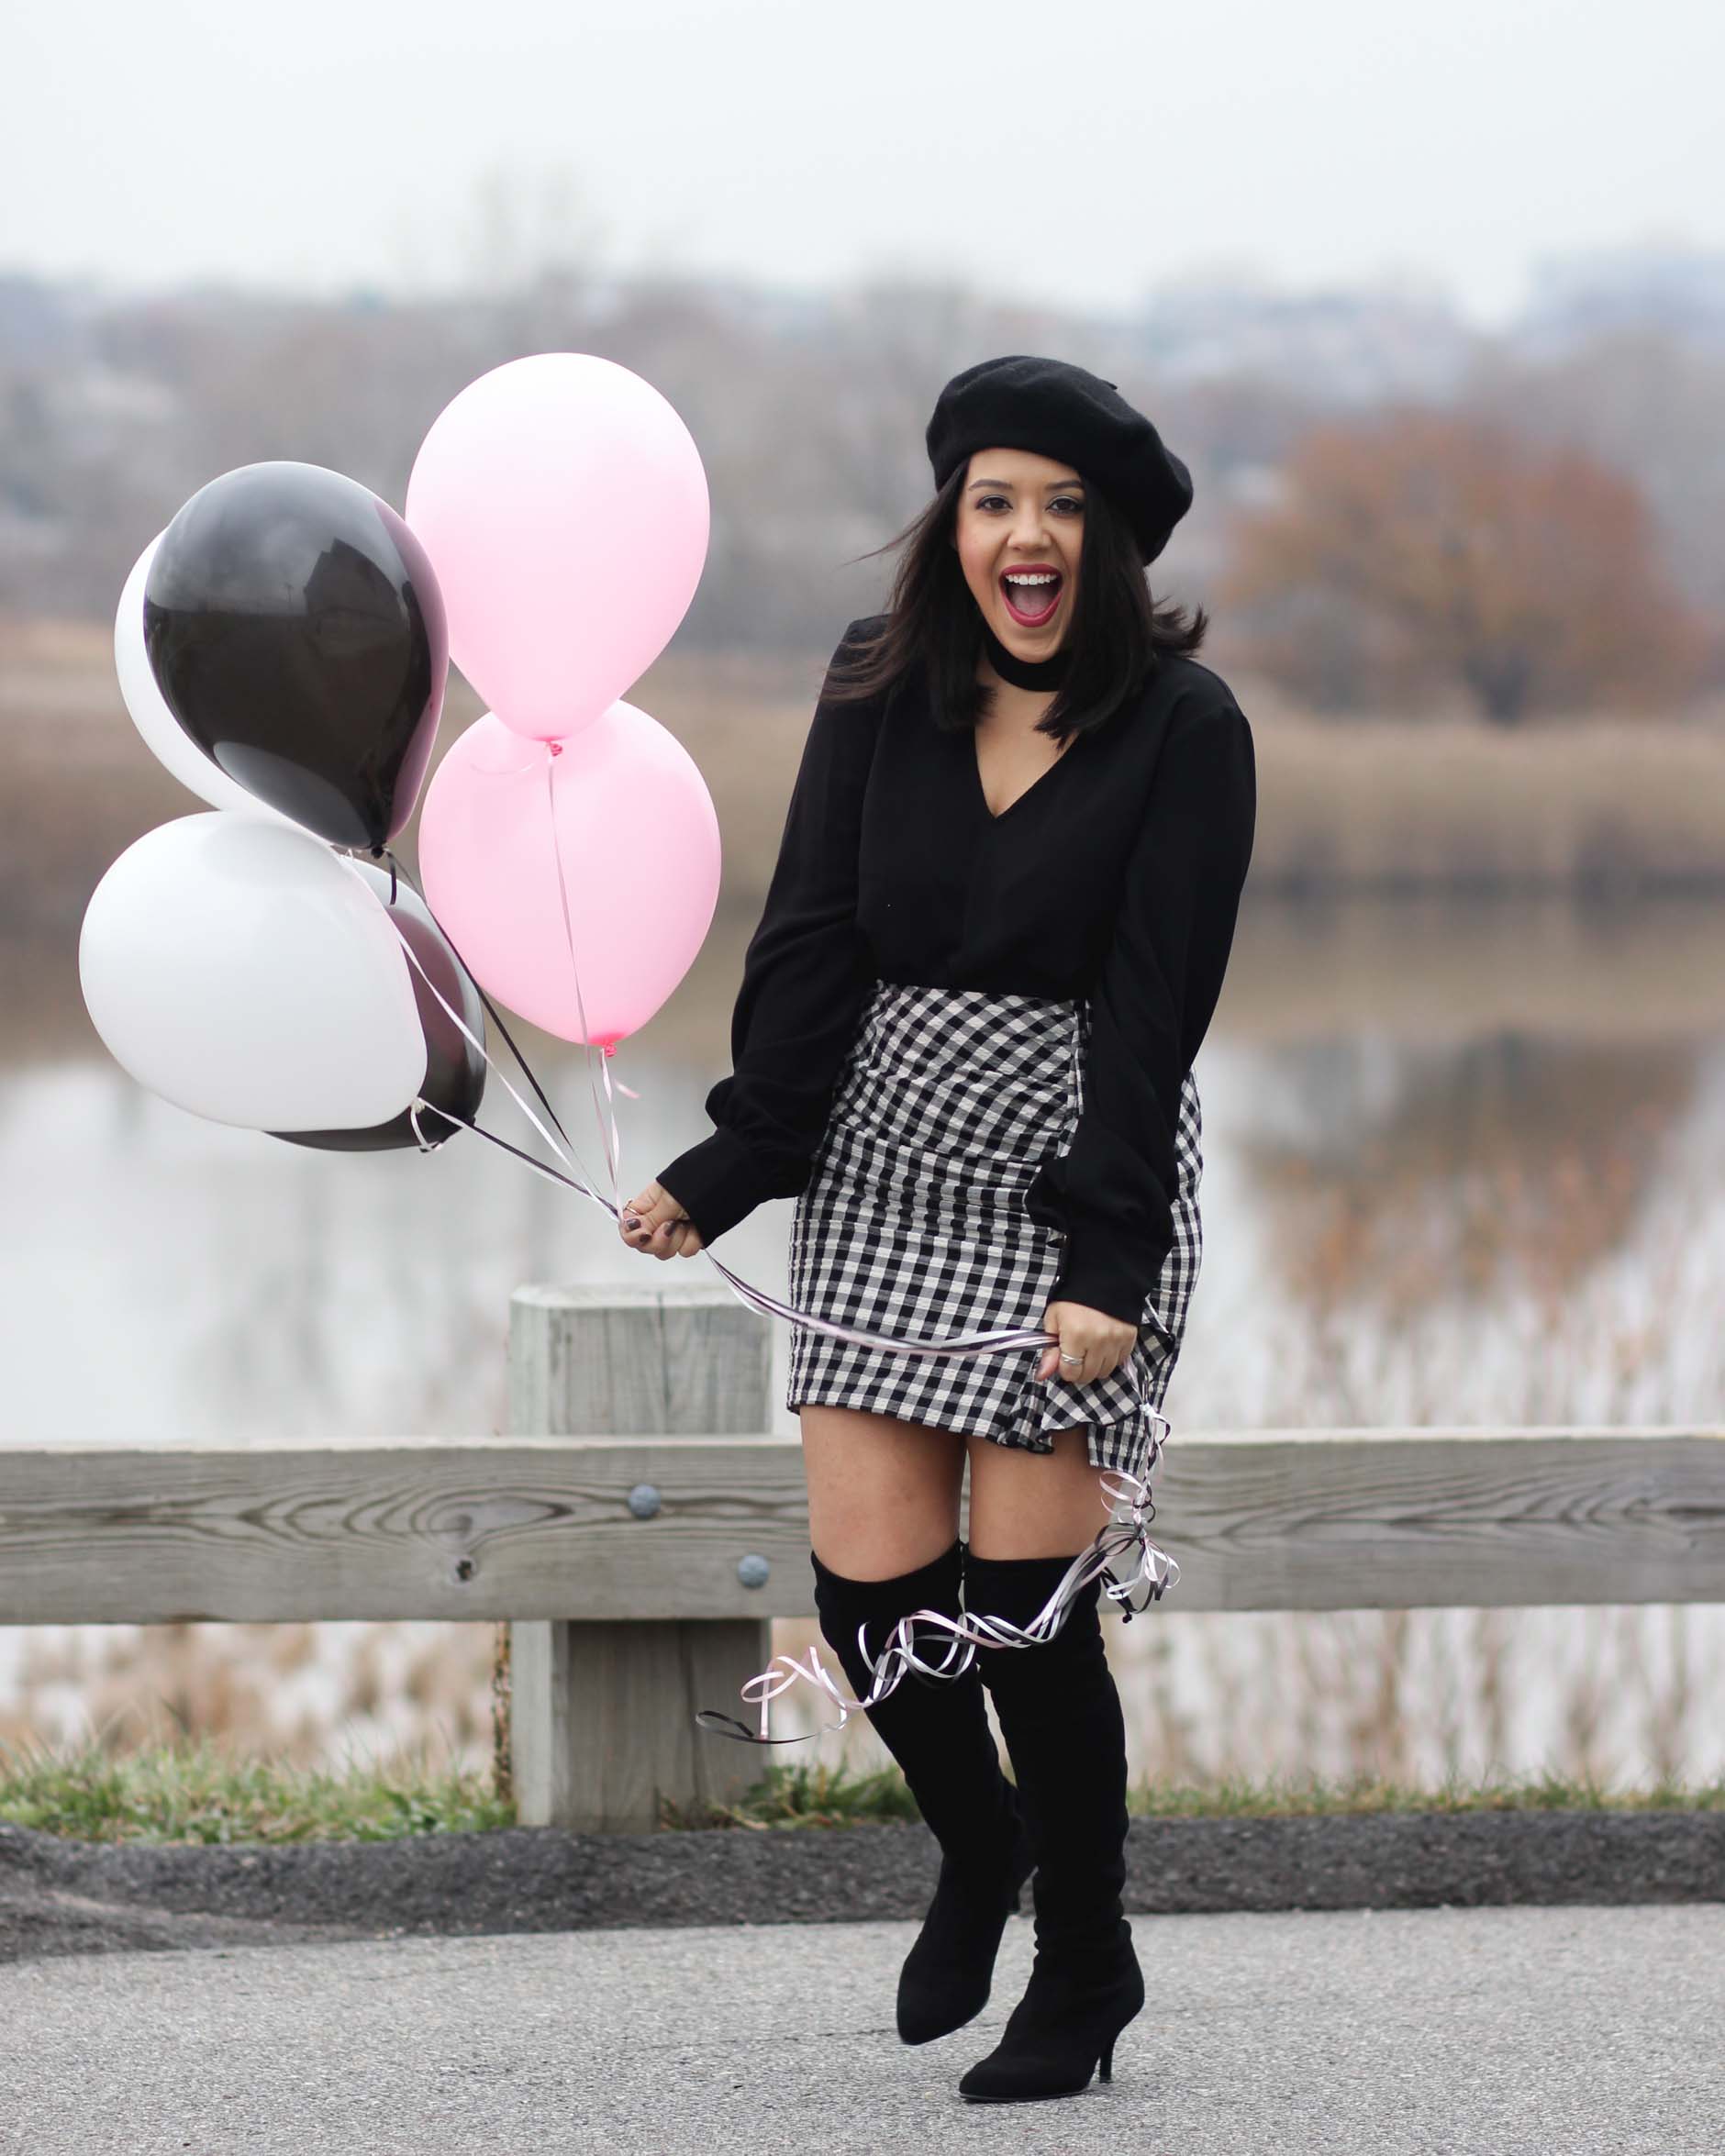 naty michele wearing beret and otk boots holding balloons